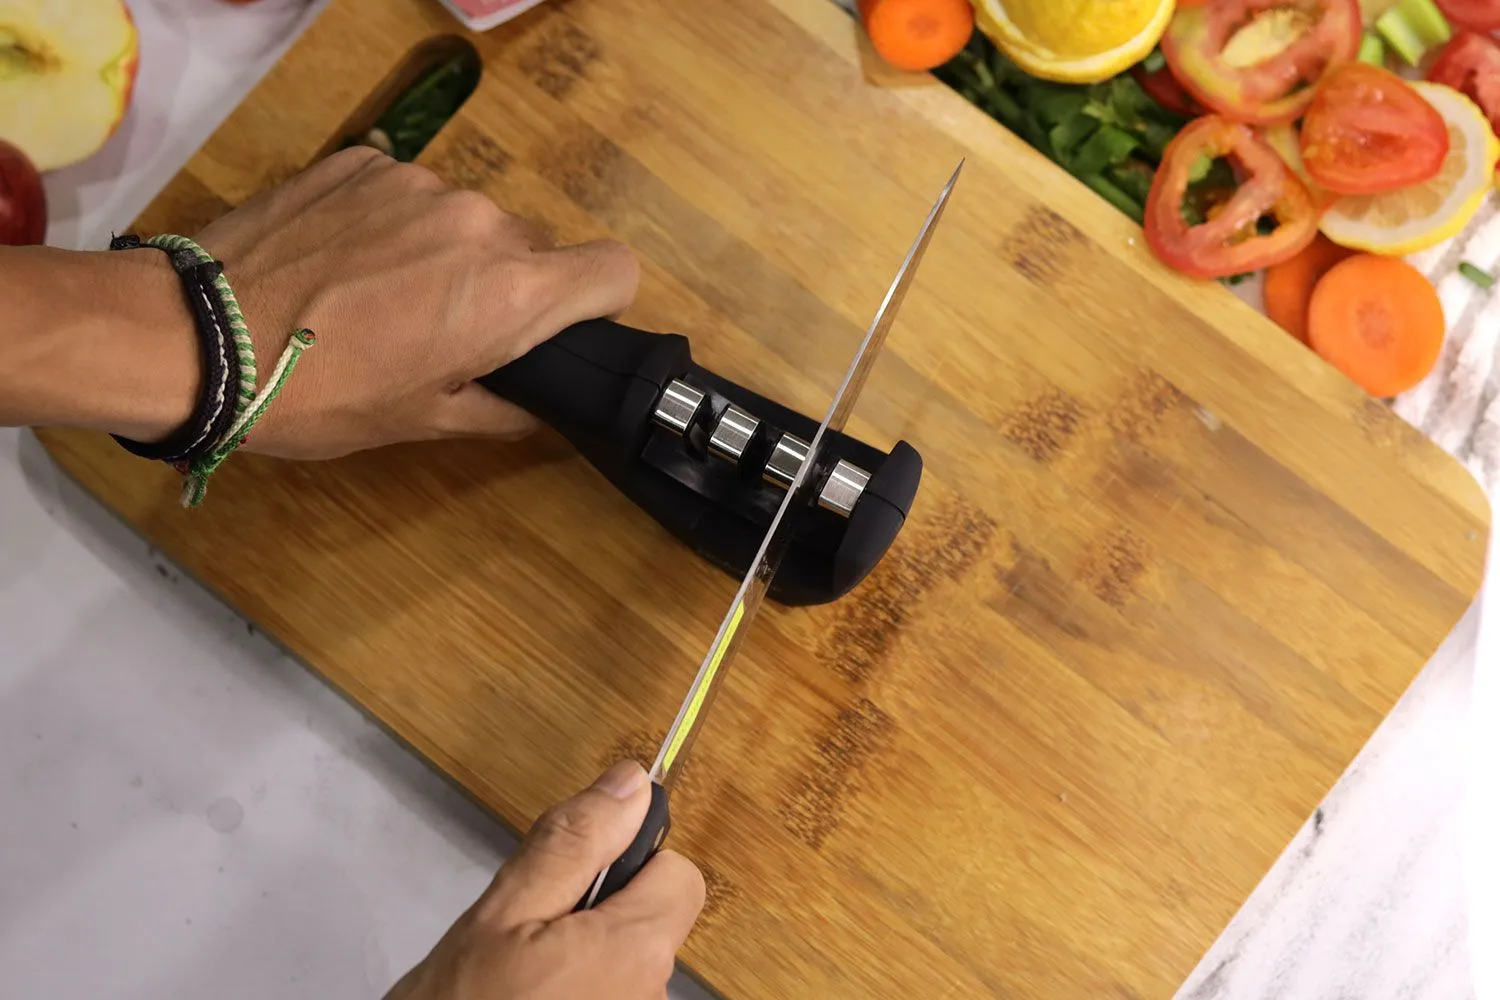 Our review of the Kitchellence knife - Healthy Kitchen 101